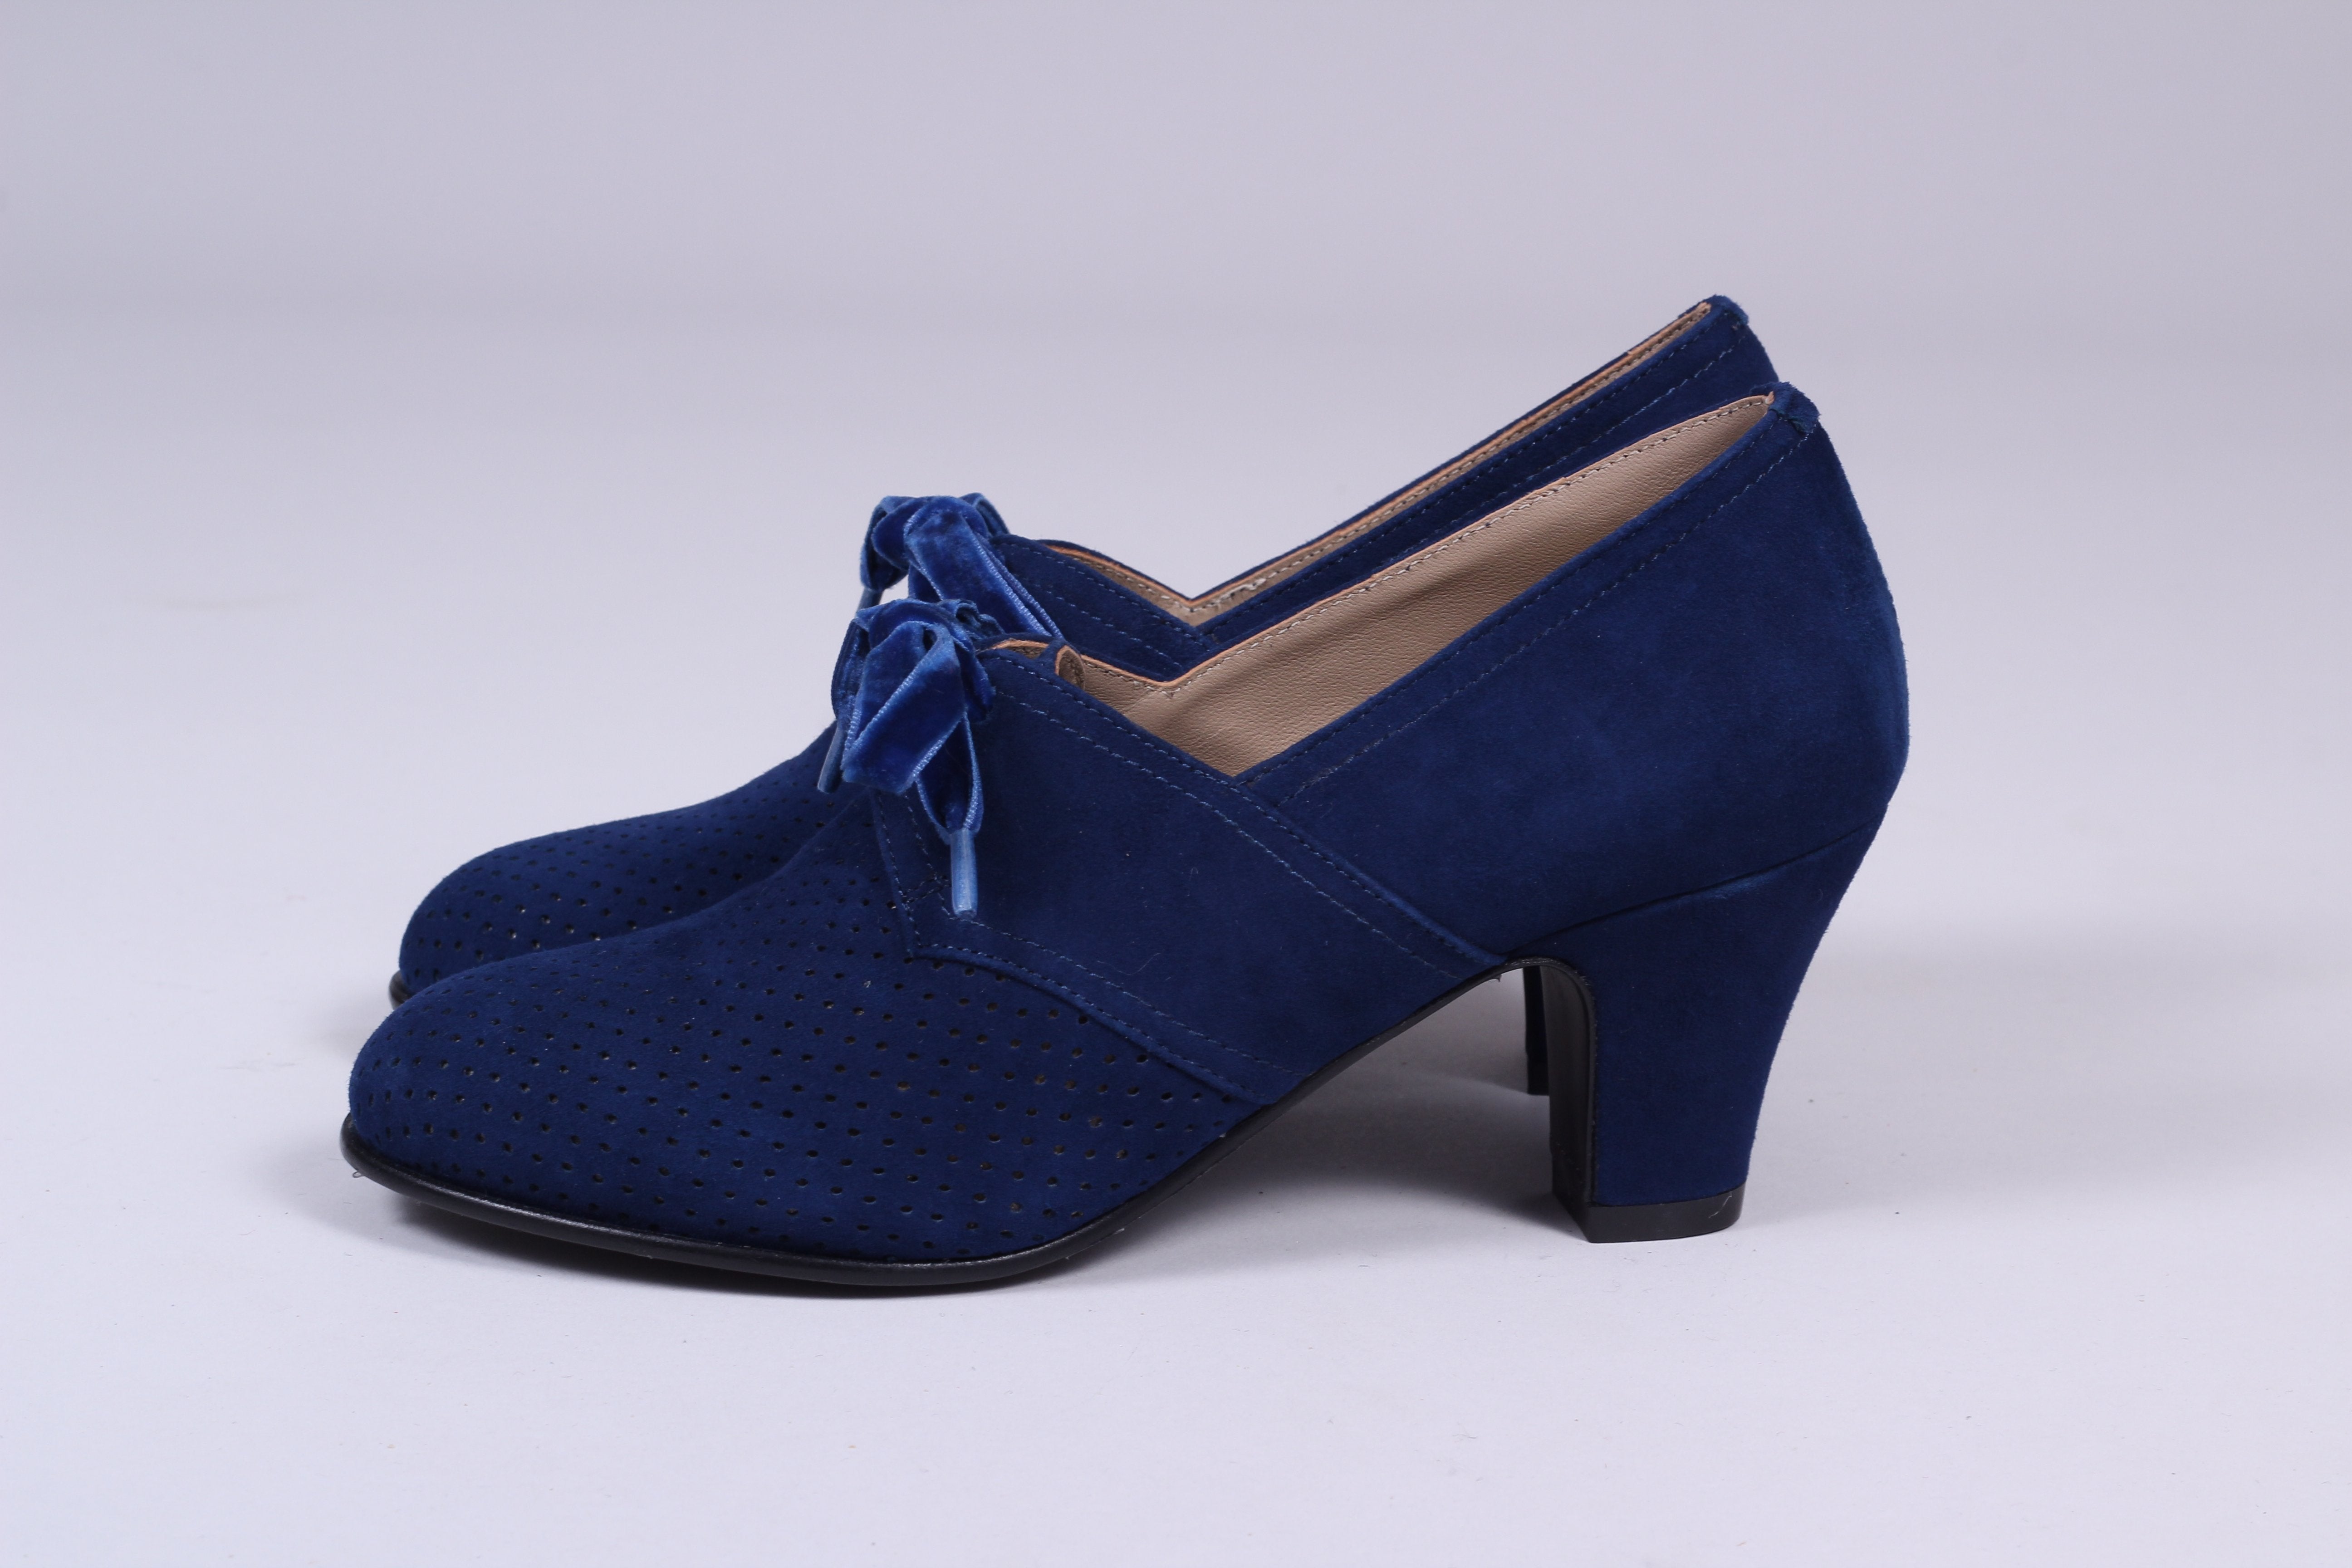 40's vintage style pumps in suede with lace - navy blue - Esther